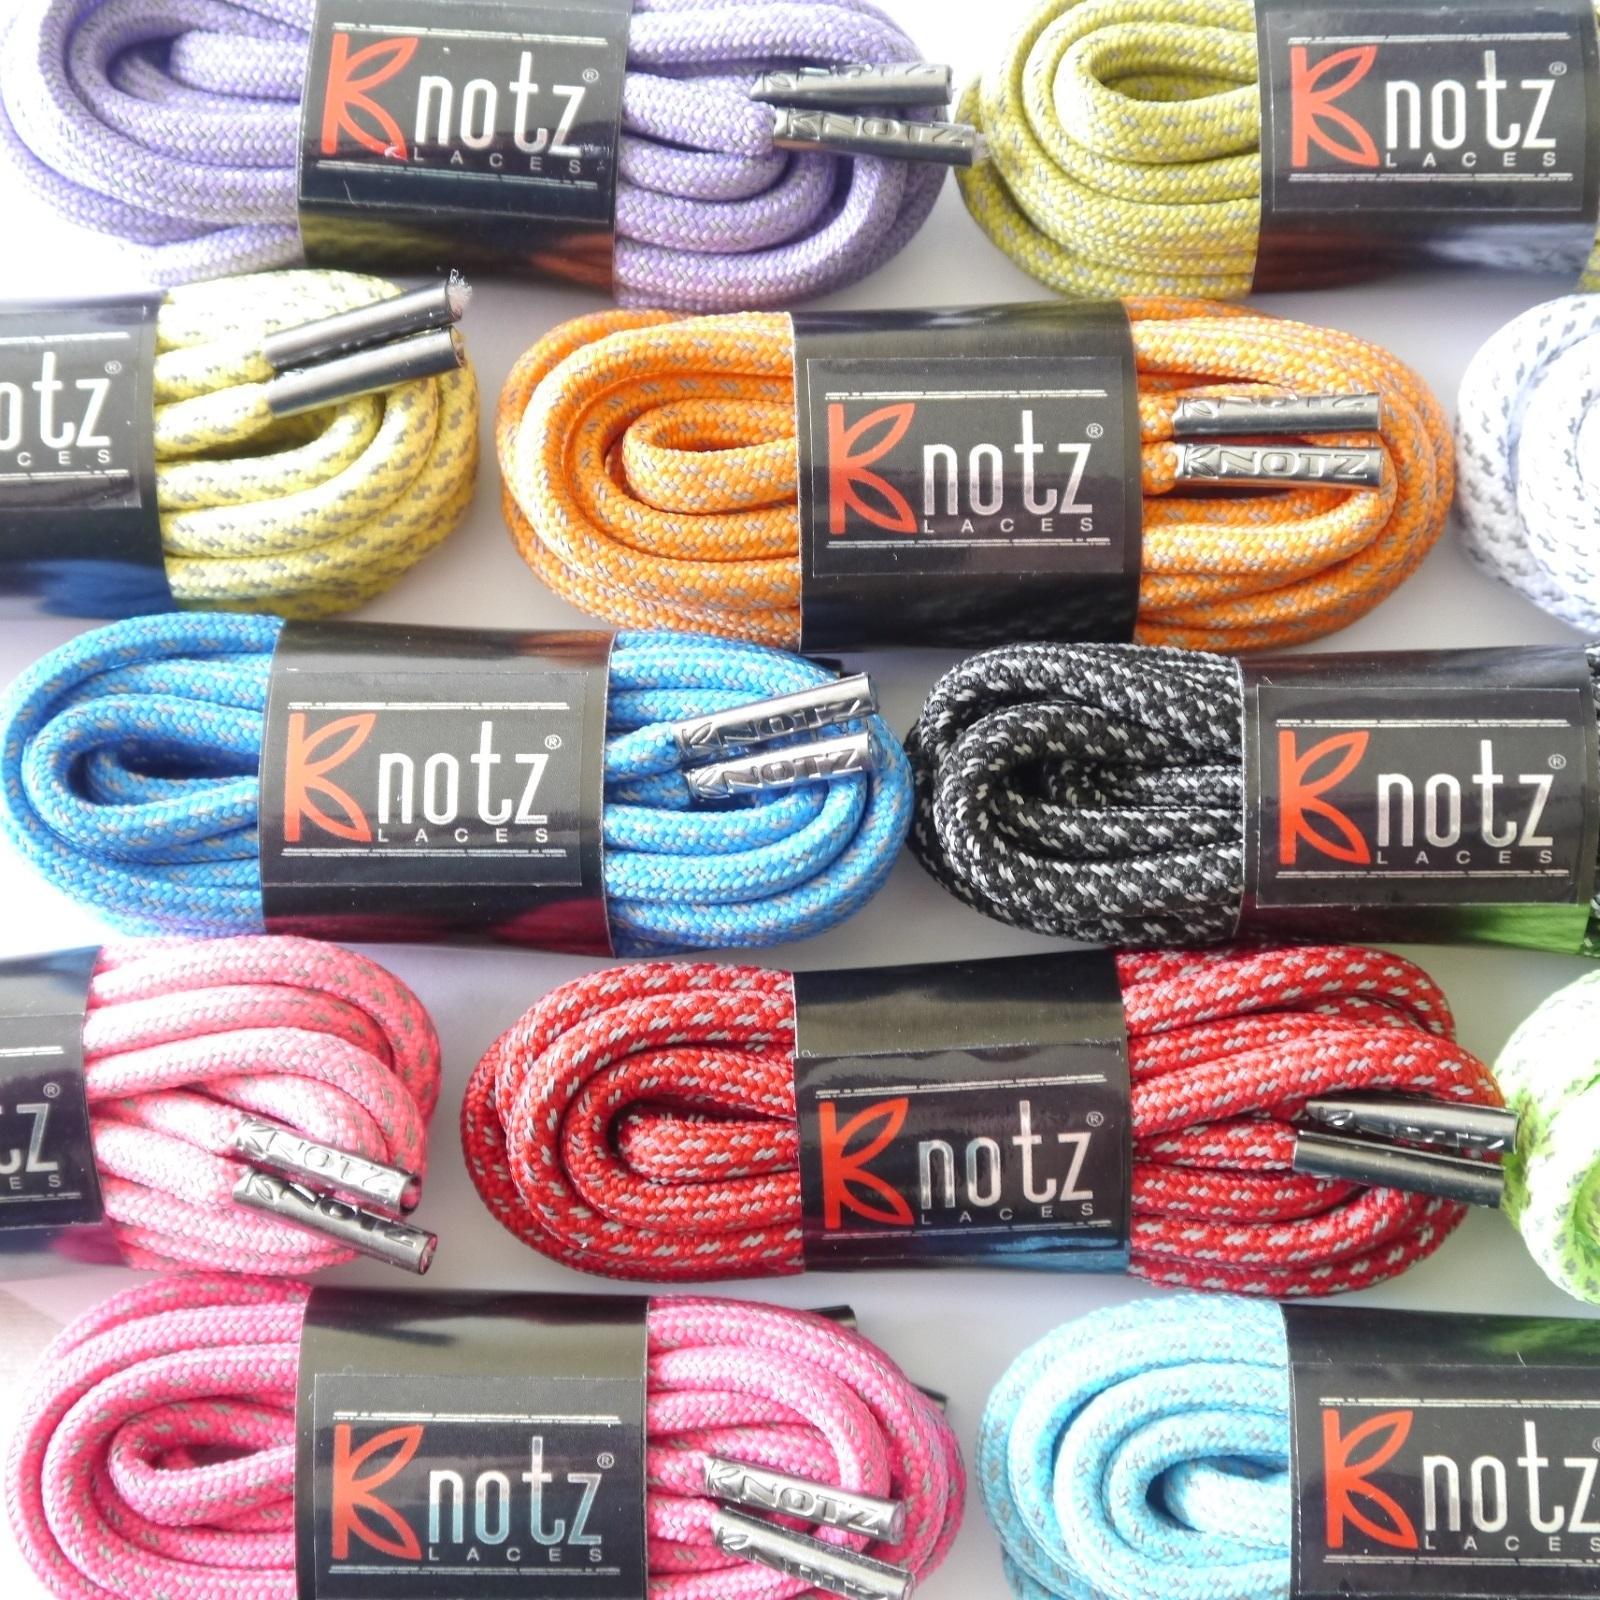 130cm long ROUND THICK ROPE STYLE REFLECTIVE LACES 5mm wide 32 COLOURS